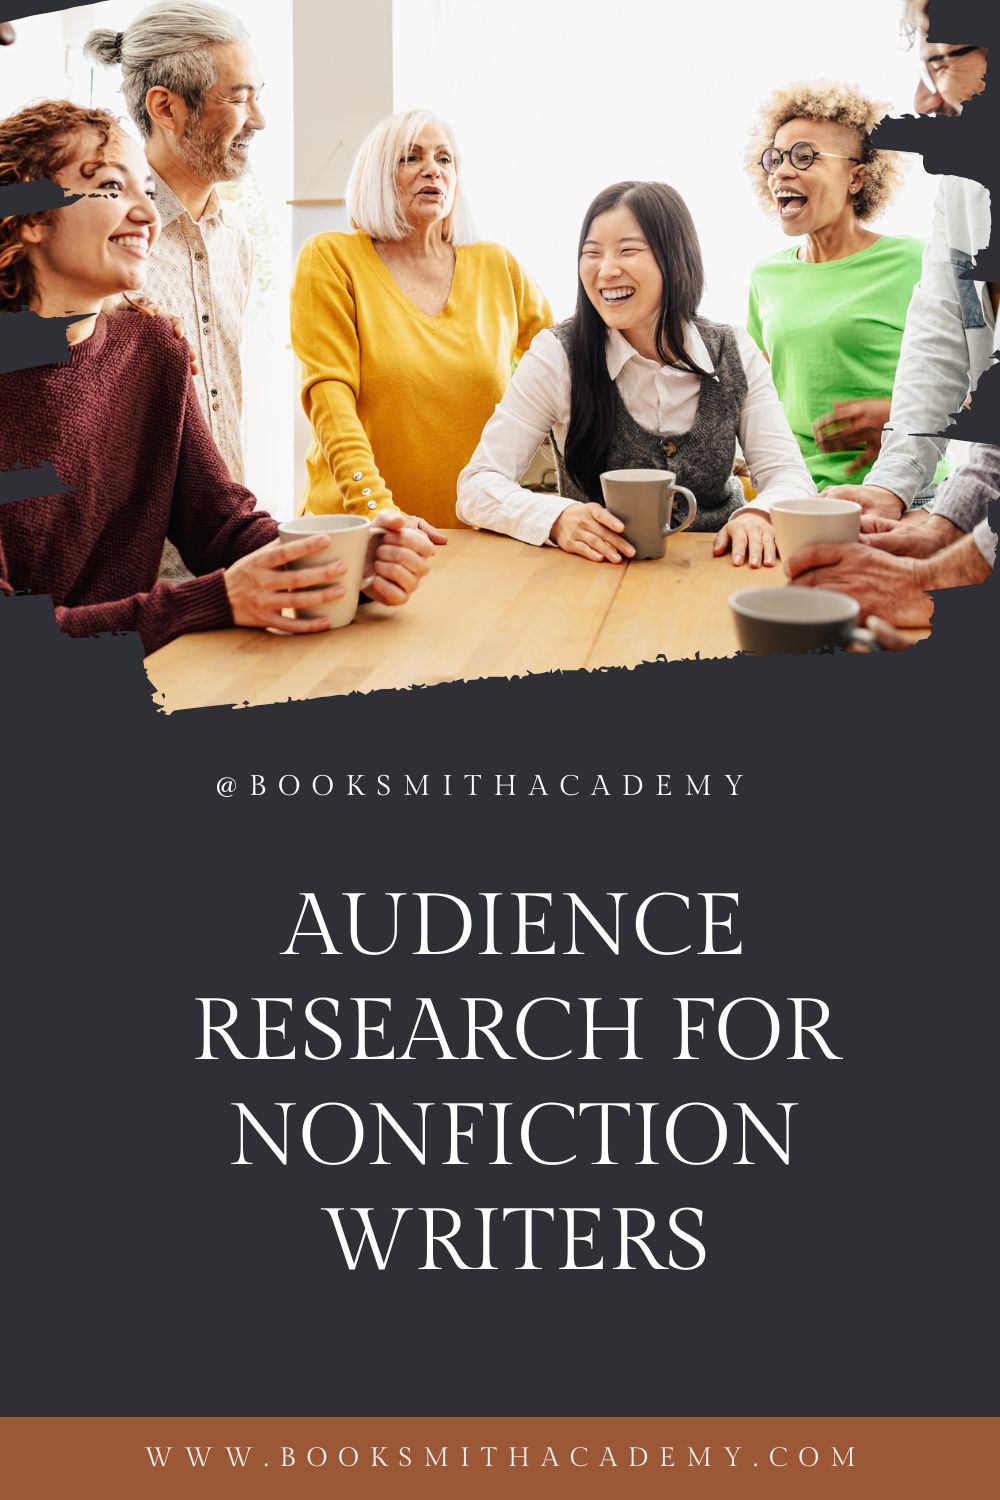 Audience research for writers